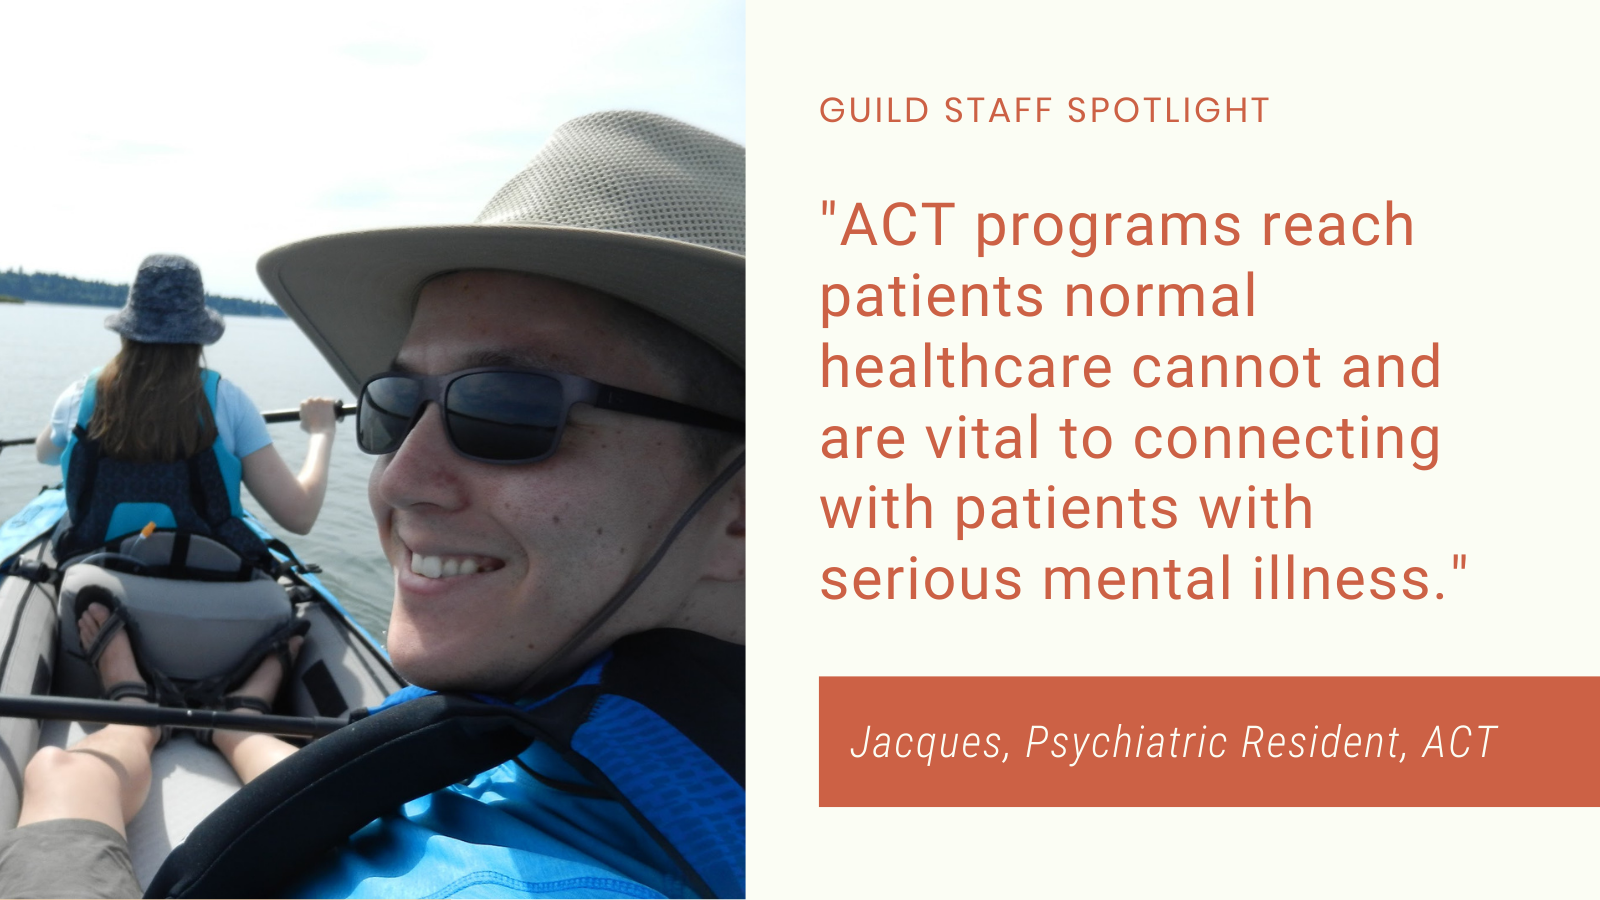 Photo of Jacques with quote "ACT programs reach patients normal healthcare cannot and are vital to connecting with patients with serious mental illness"